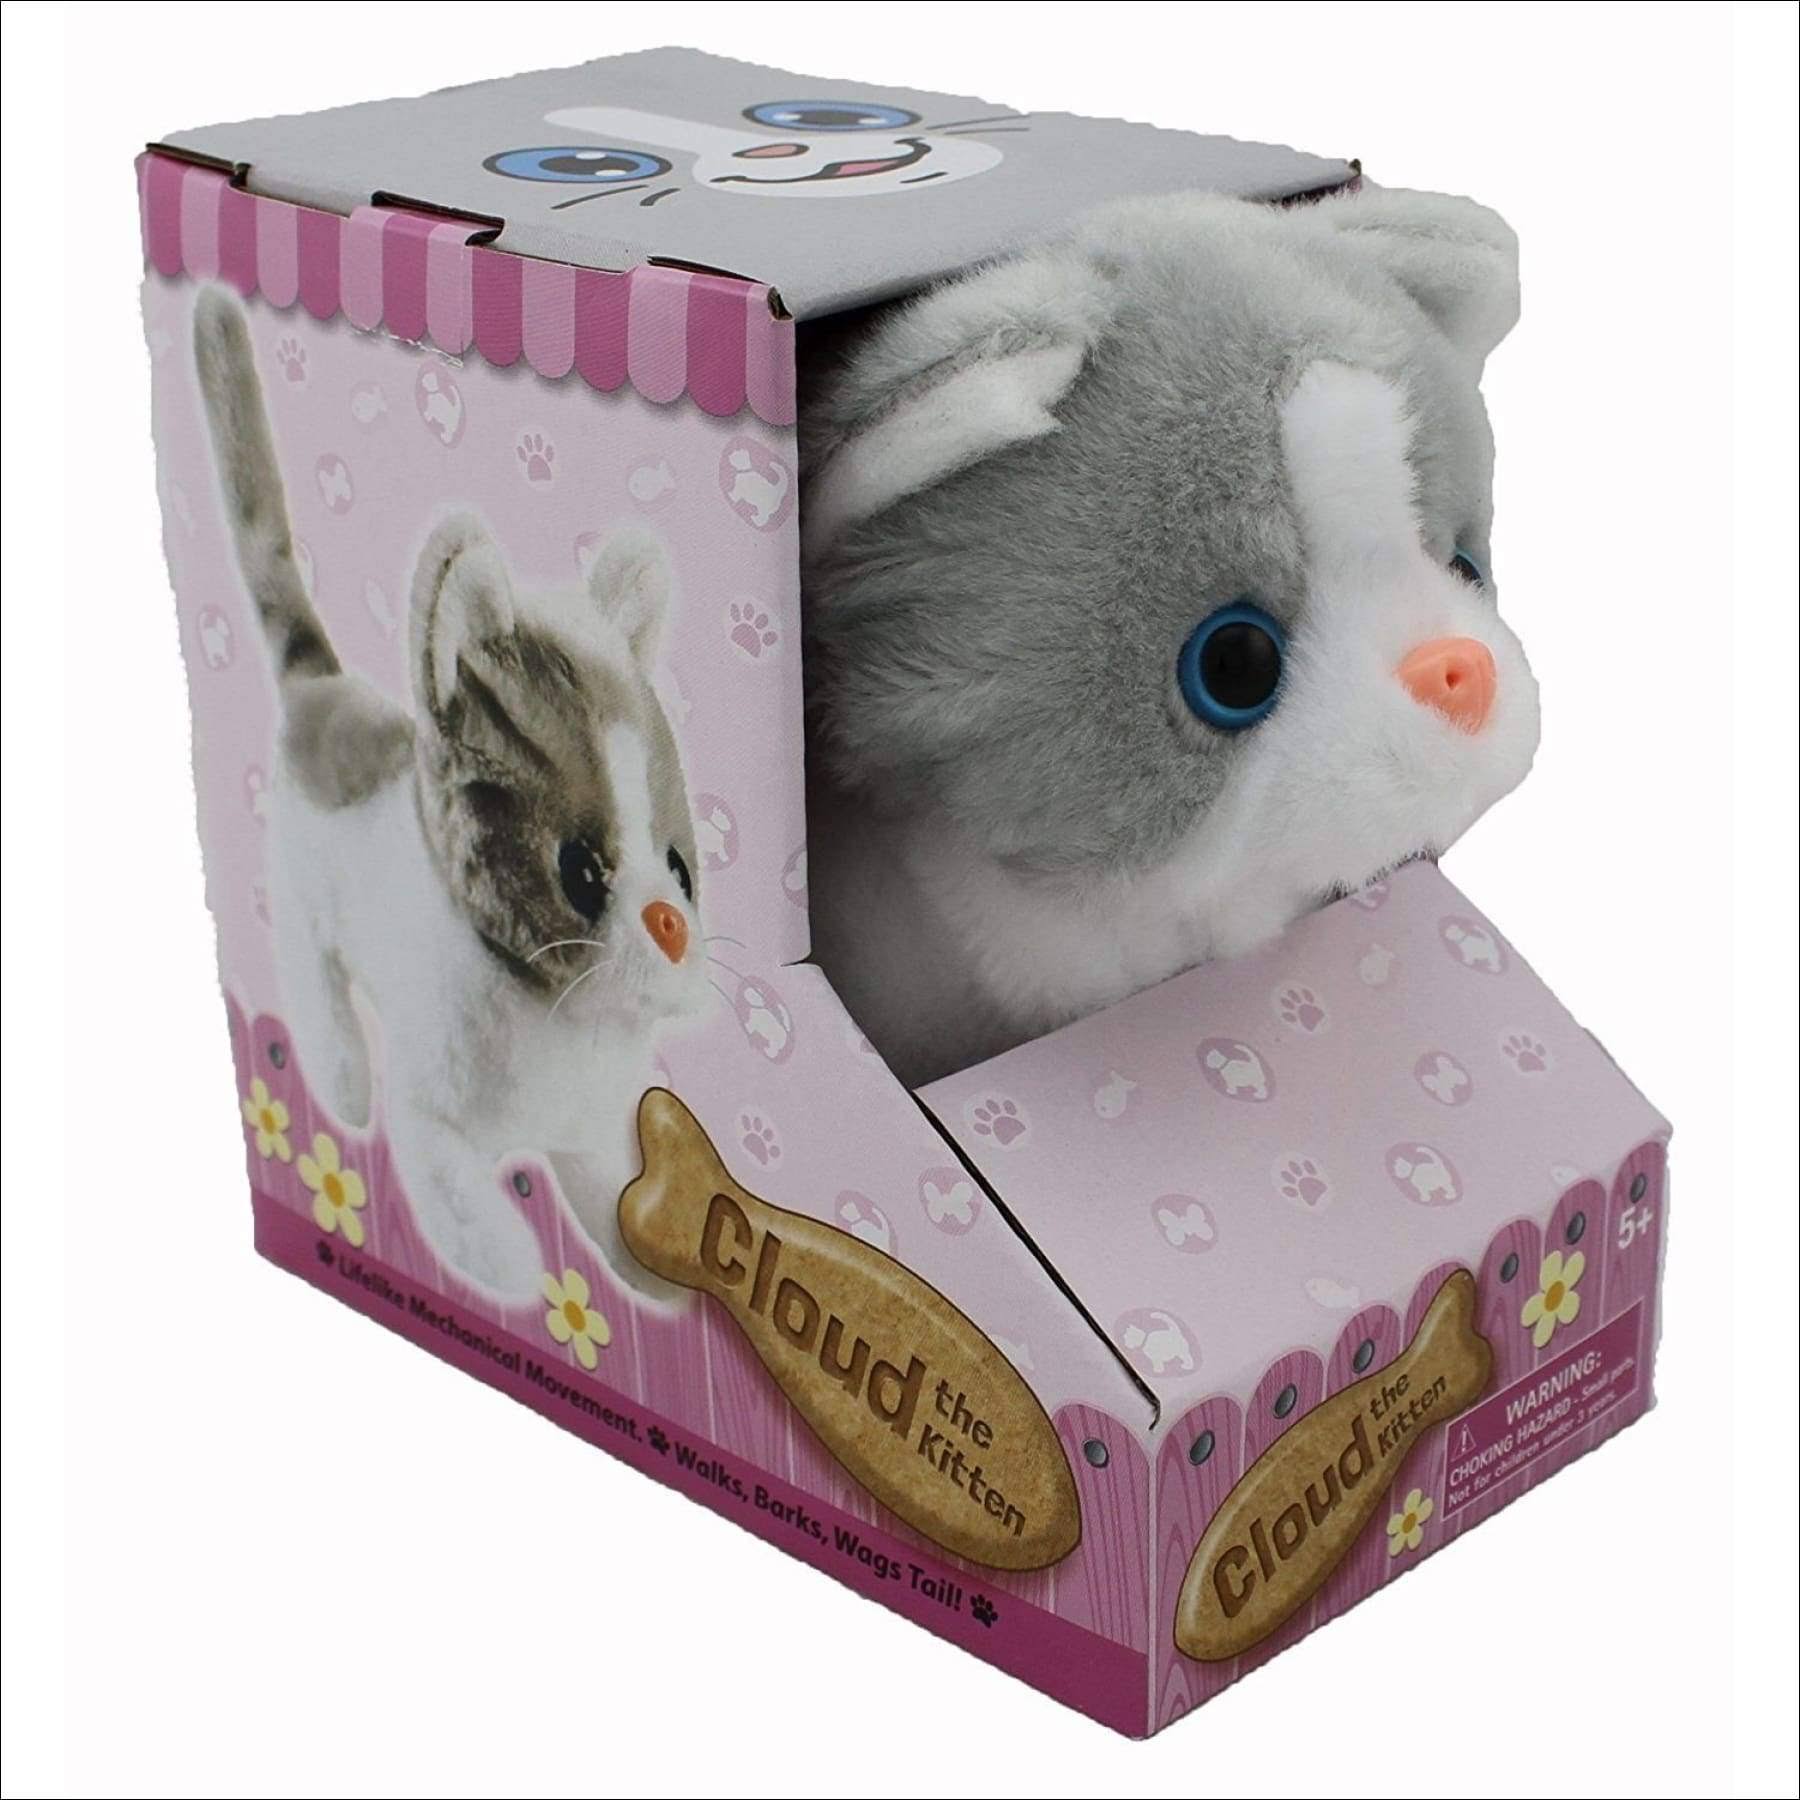 Westminster Cloud The Mechanical Kitten Toy - Gray/White